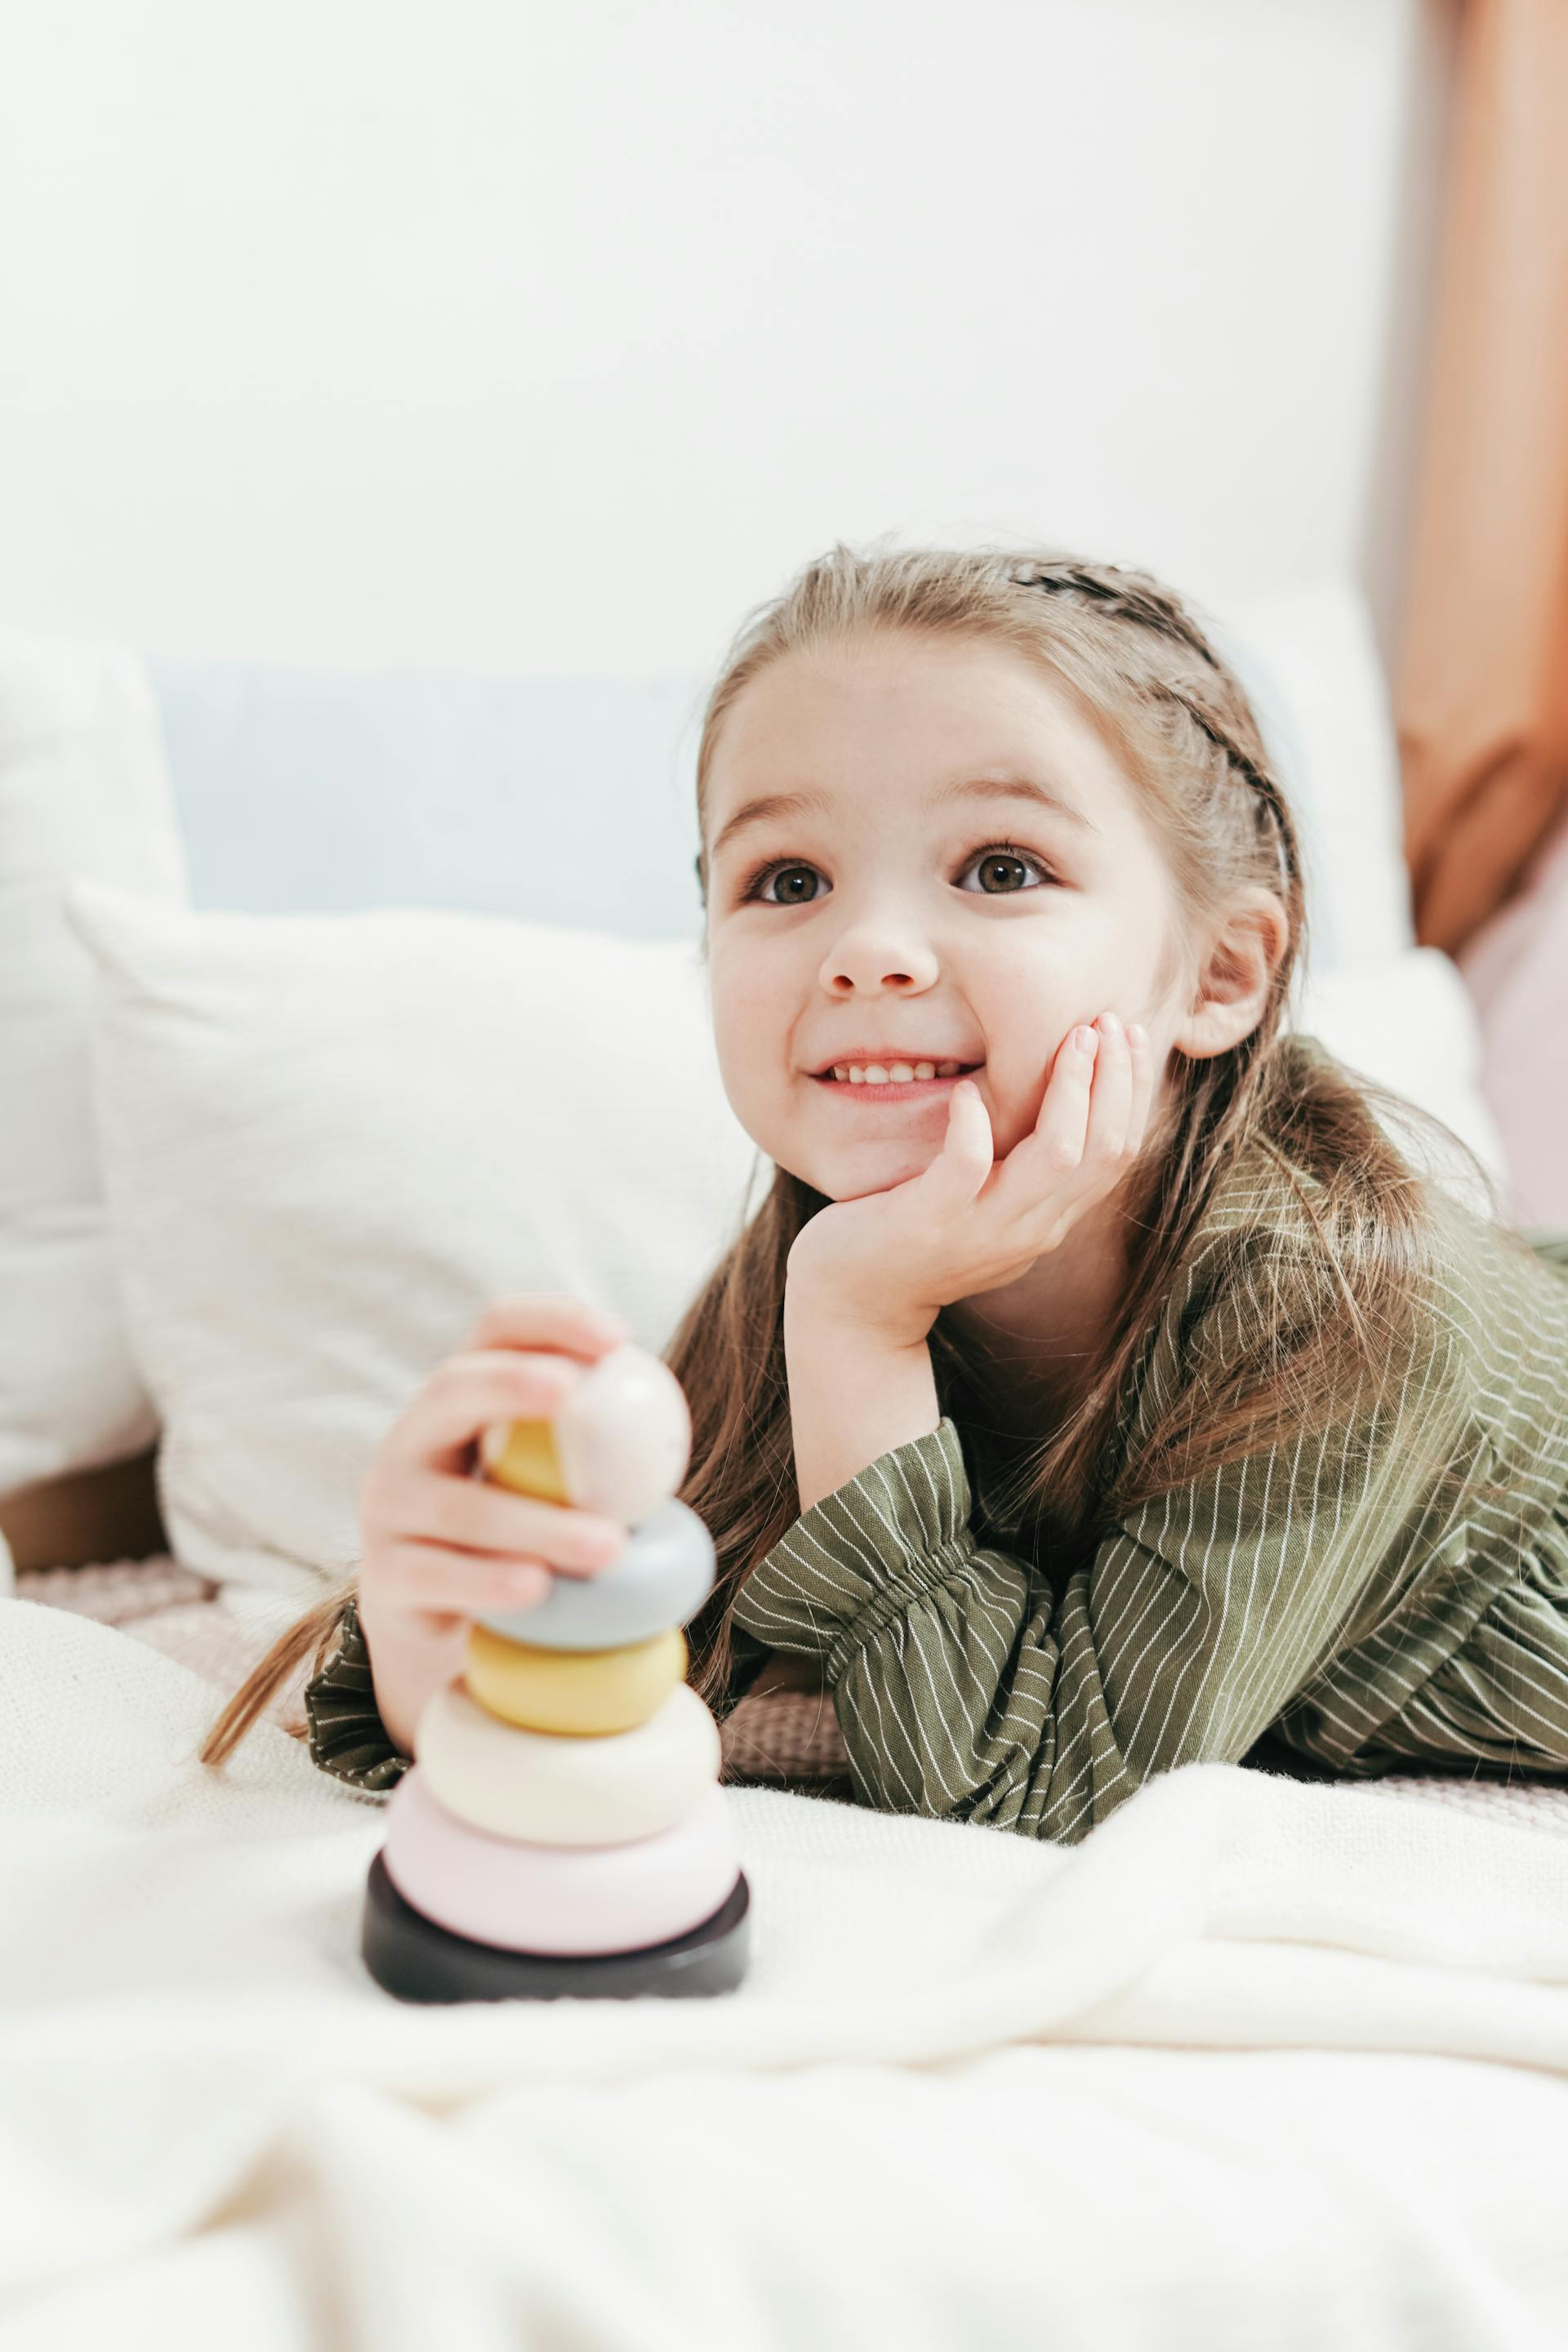 A smiling little girl with a toy | Source: Pexels